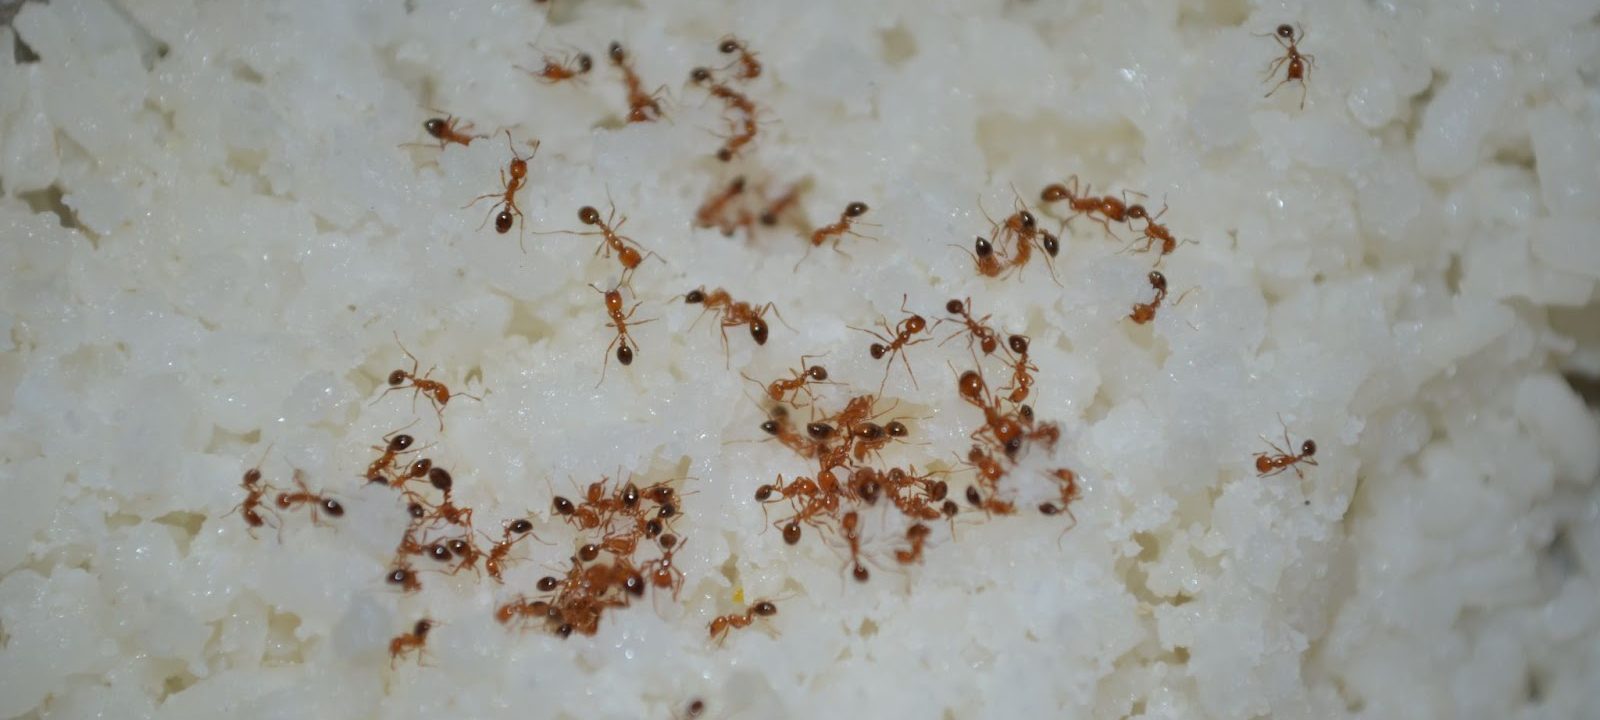 How to Keep Ants Out of Your Home